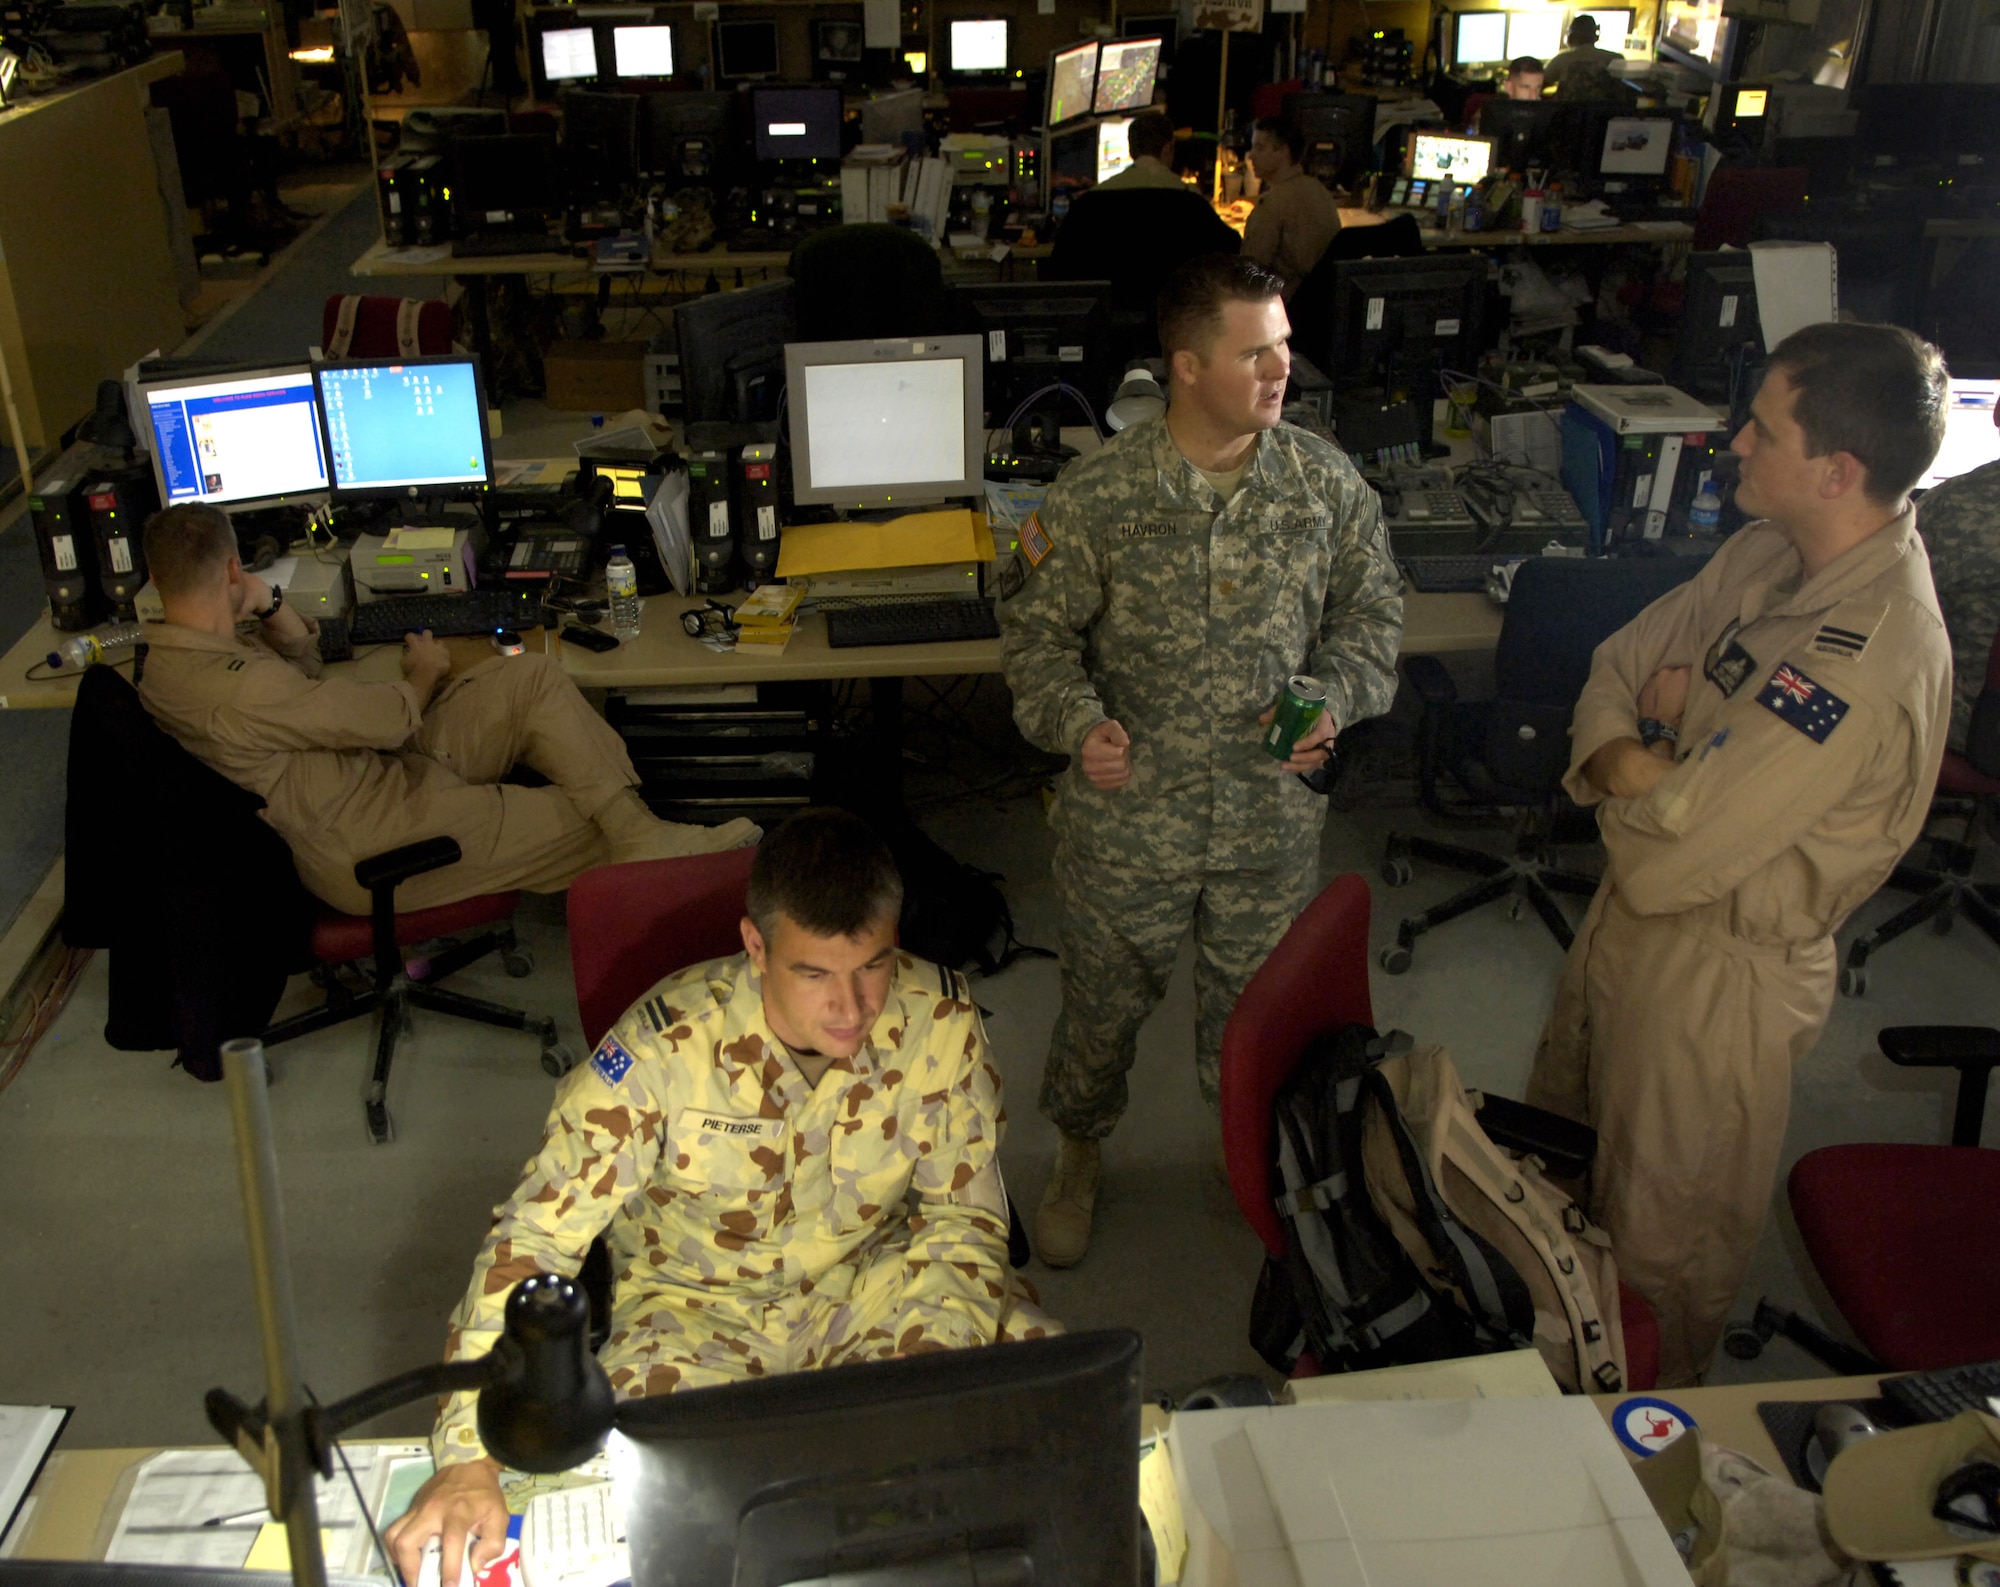 Flight Lt. Herman Pieterse works at his computer as Army Maj. Brandon Havron discusses battlefield coordination with Flight Lt. Ben Miedecke on Thursday, June 1, 2006, at the Combined Air Operations Center in Southwest Asia. The lieutenants are liaison officers for the Royal Australian Air Force; Major Havron is with the battlefield coordination detachment at the CAOC. (U.S. Air Force photo/Senior Airman Brian Ferguson) 